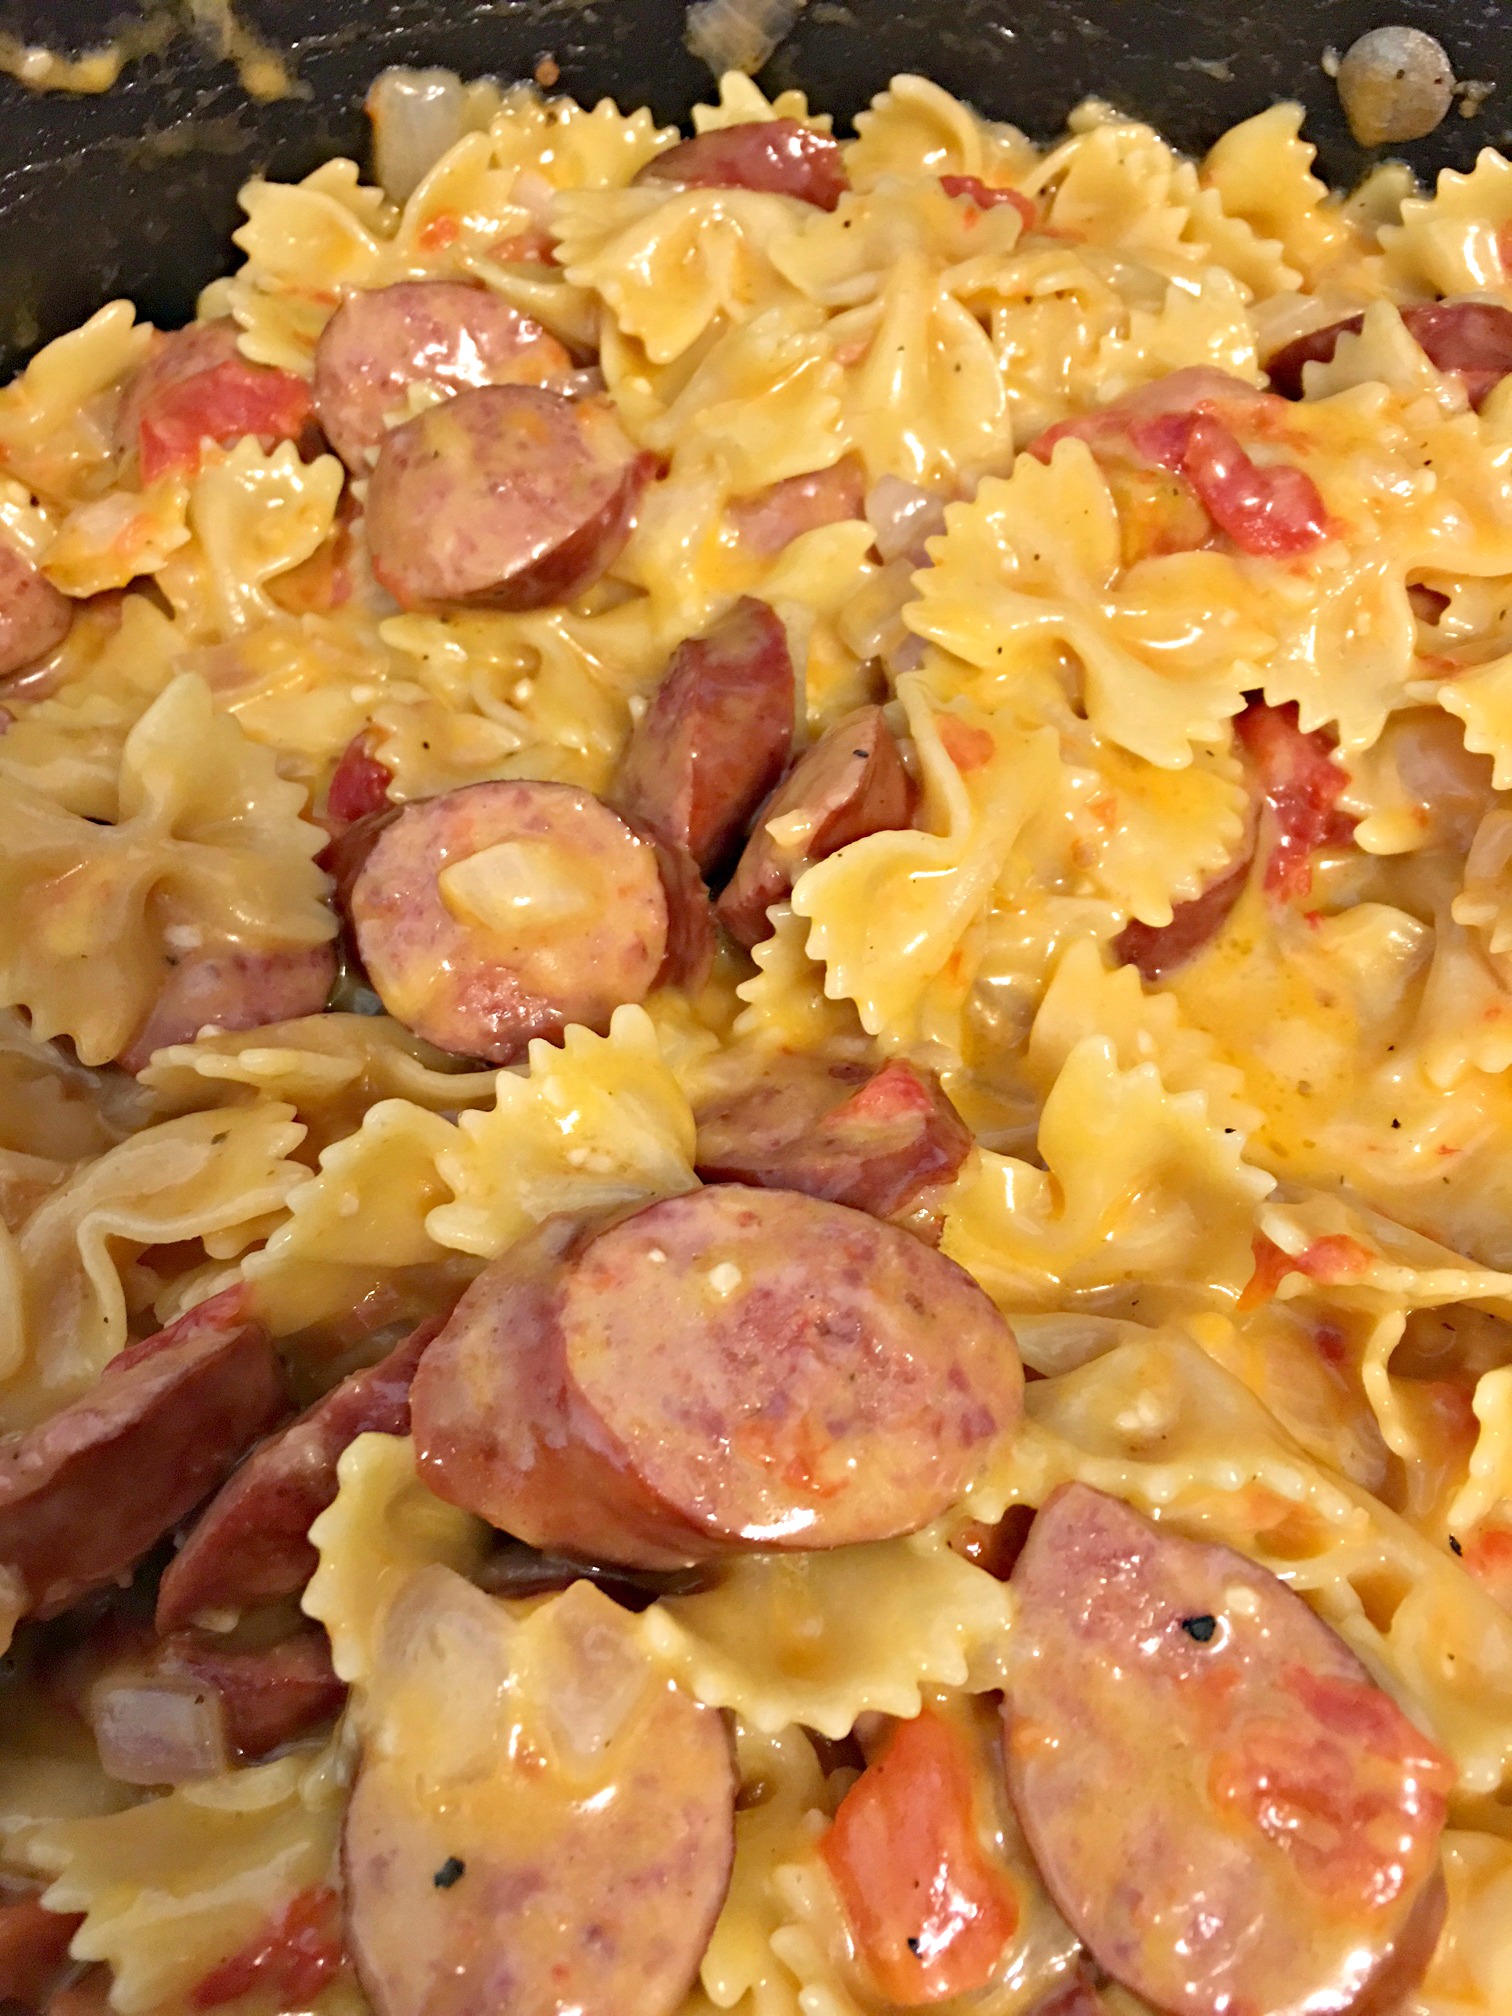 Easy Recipe: One Pot Smoked Sausage Pasta - Juggling Real Food and Real